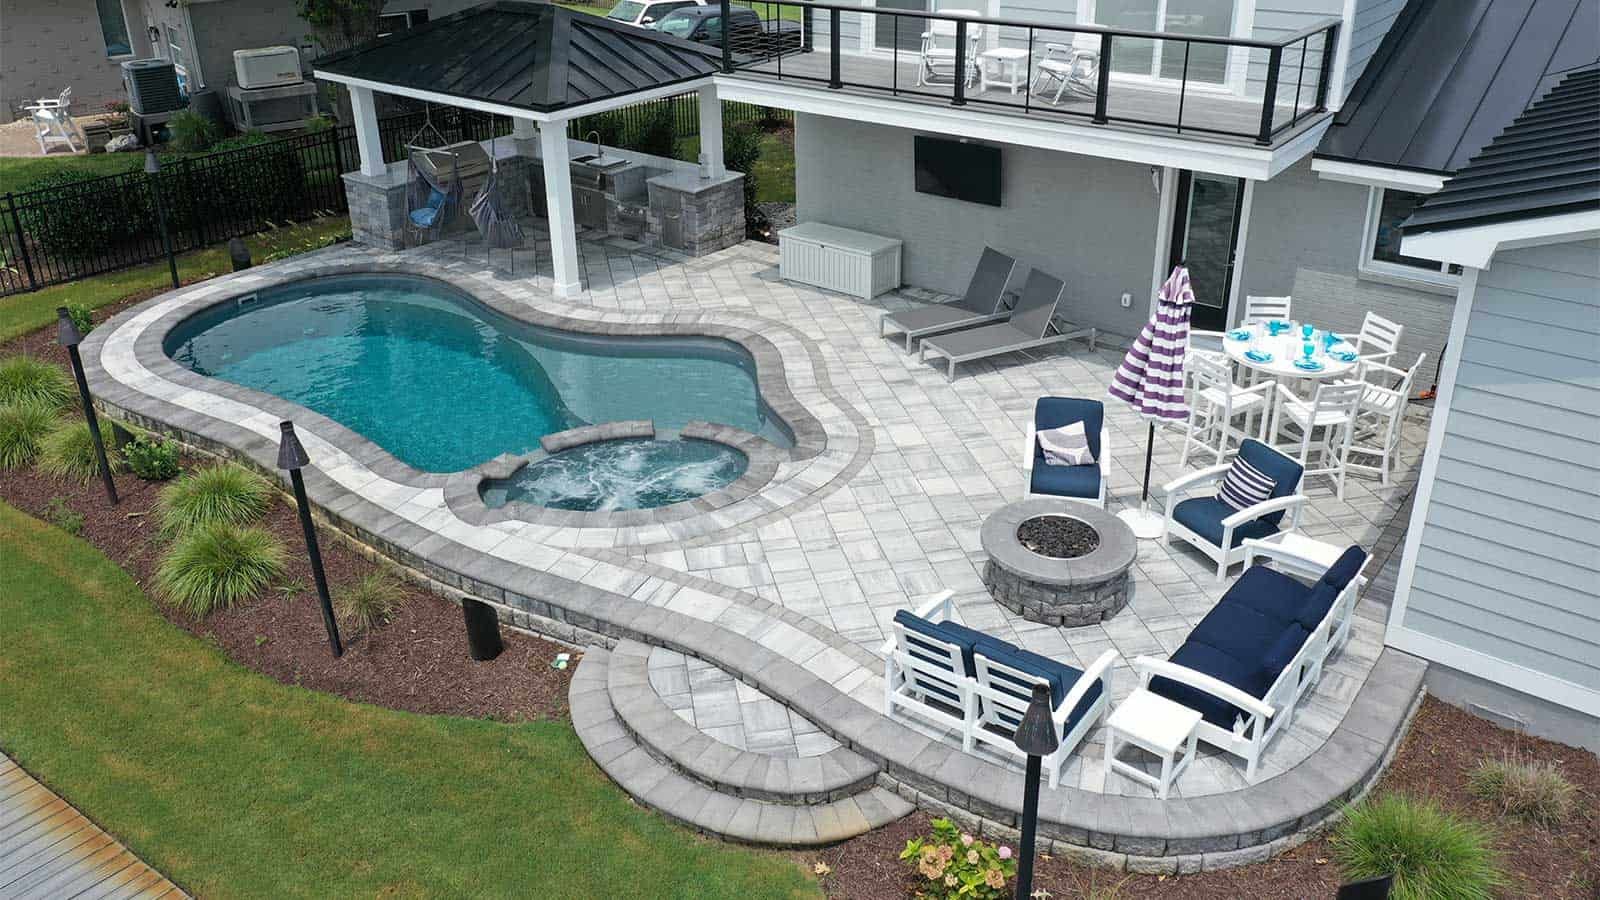 Outdoor hardscape with pavers by a fiberglass pool